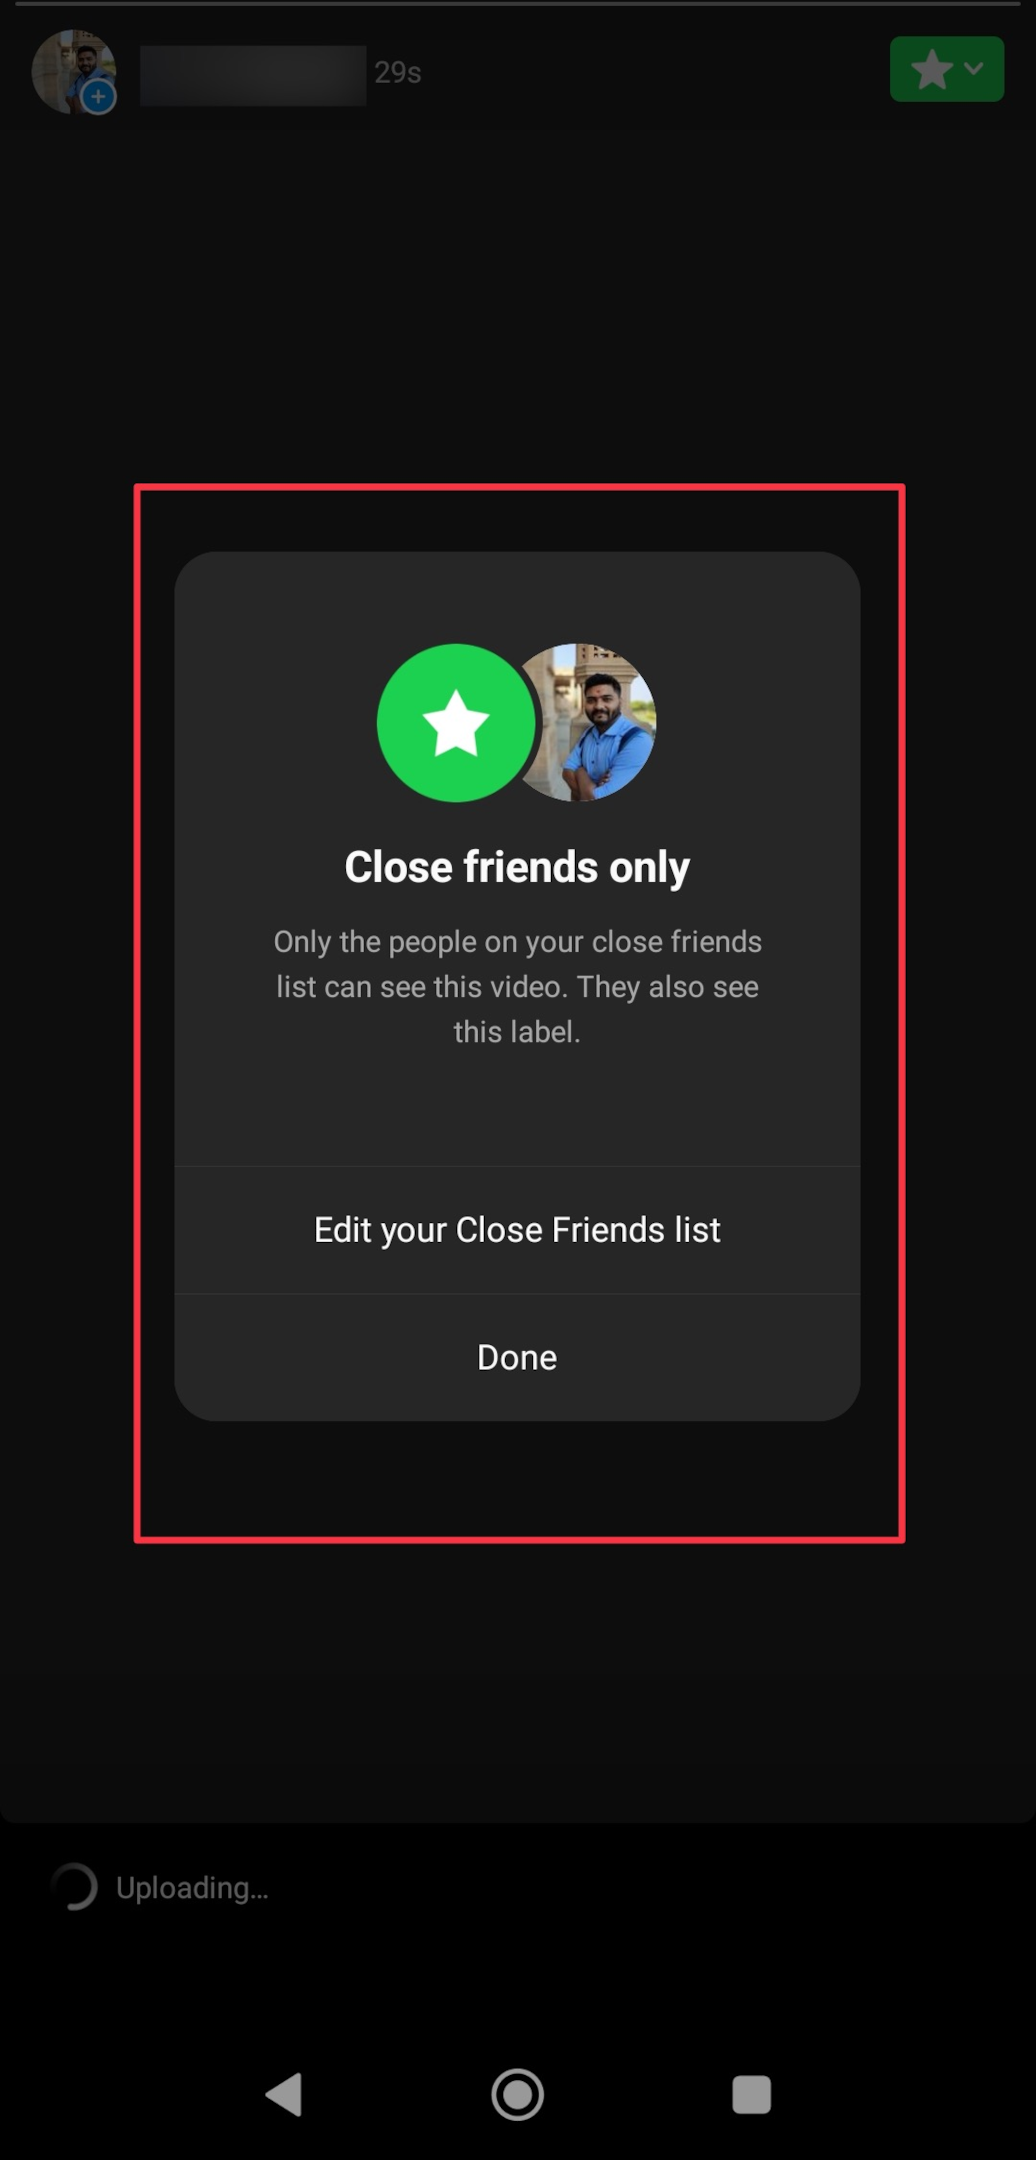 Remote.tools shows how to edit your close friends list on Instagram app for Android